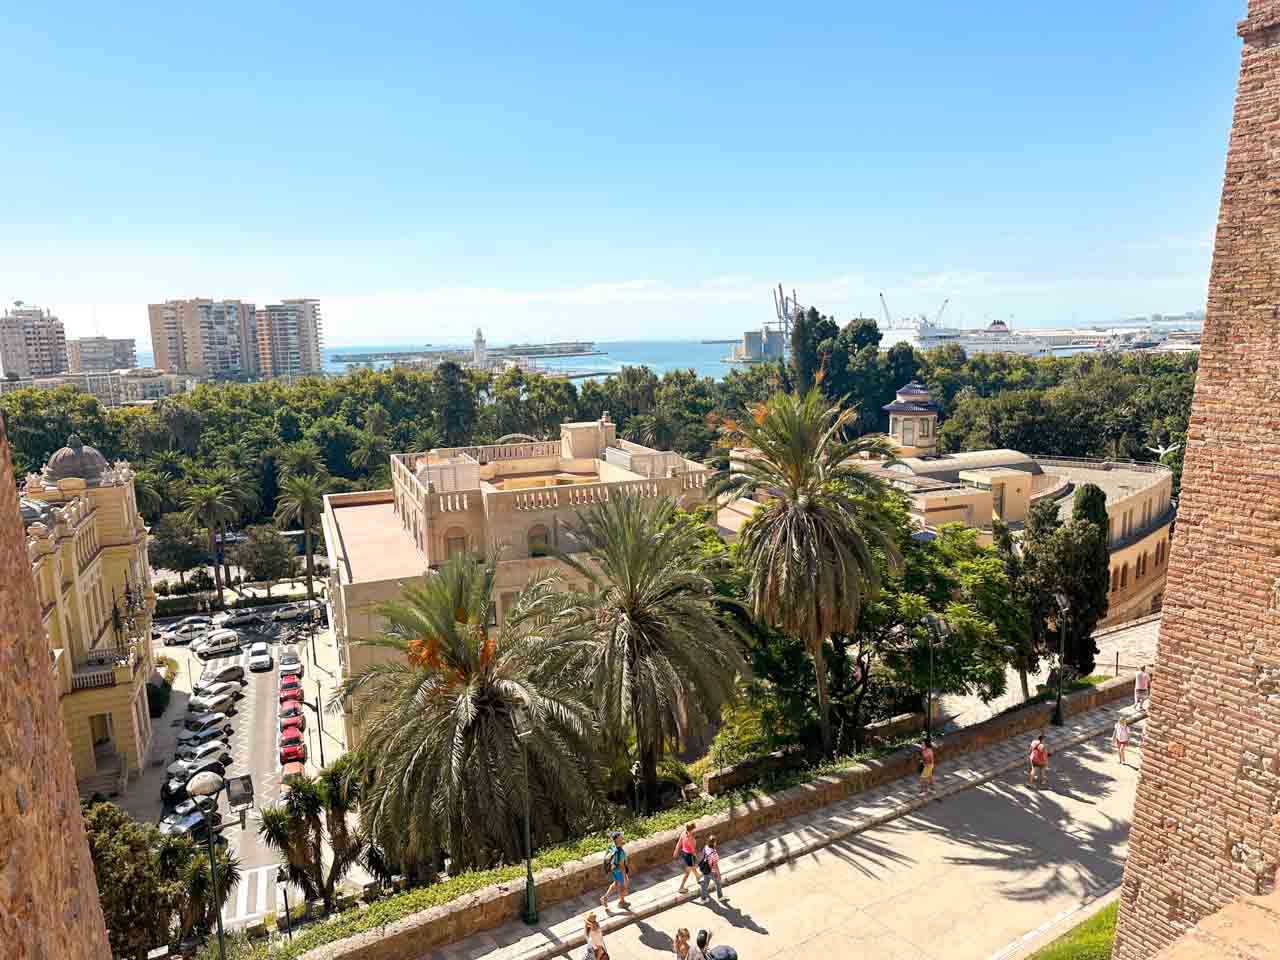 Panoramic view of Malaga seen from the Gibralfaro Castle